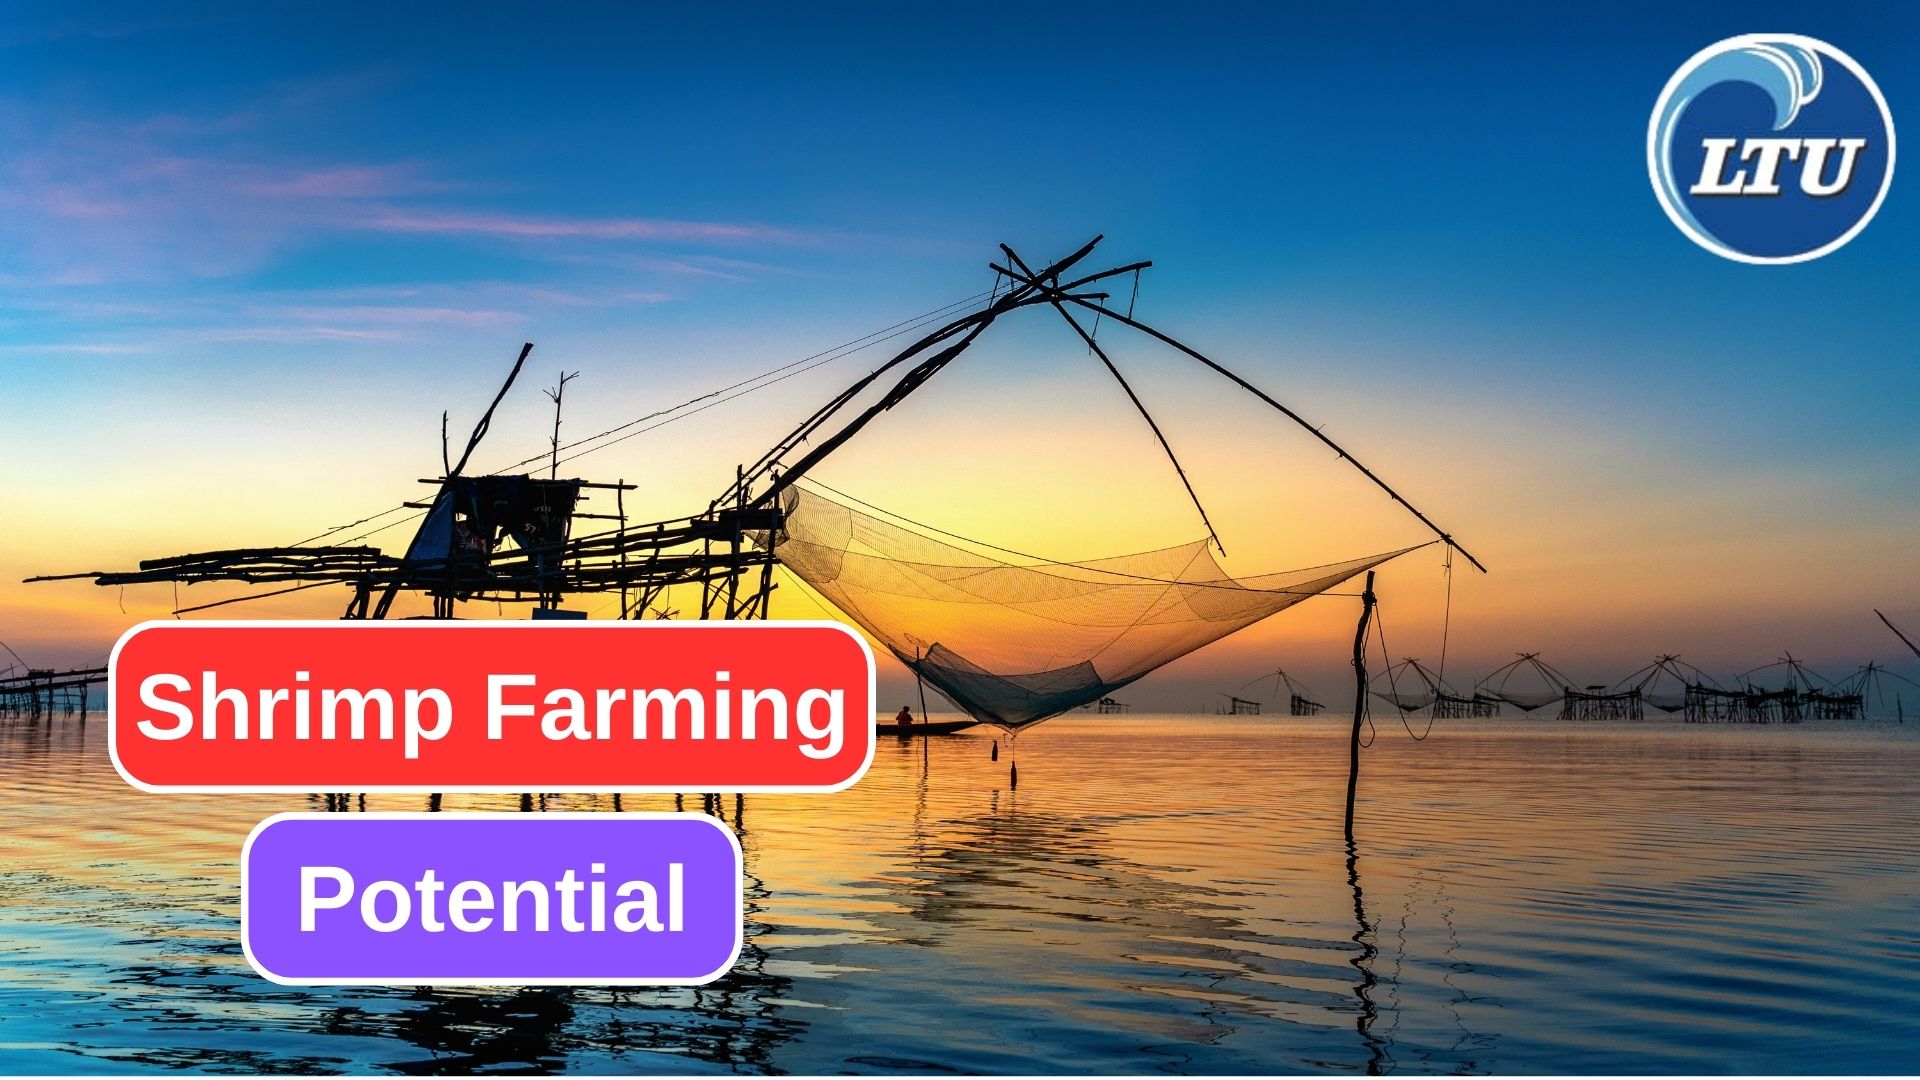 Potential Opportunities of Shrimp Farming in the Seafood Industry